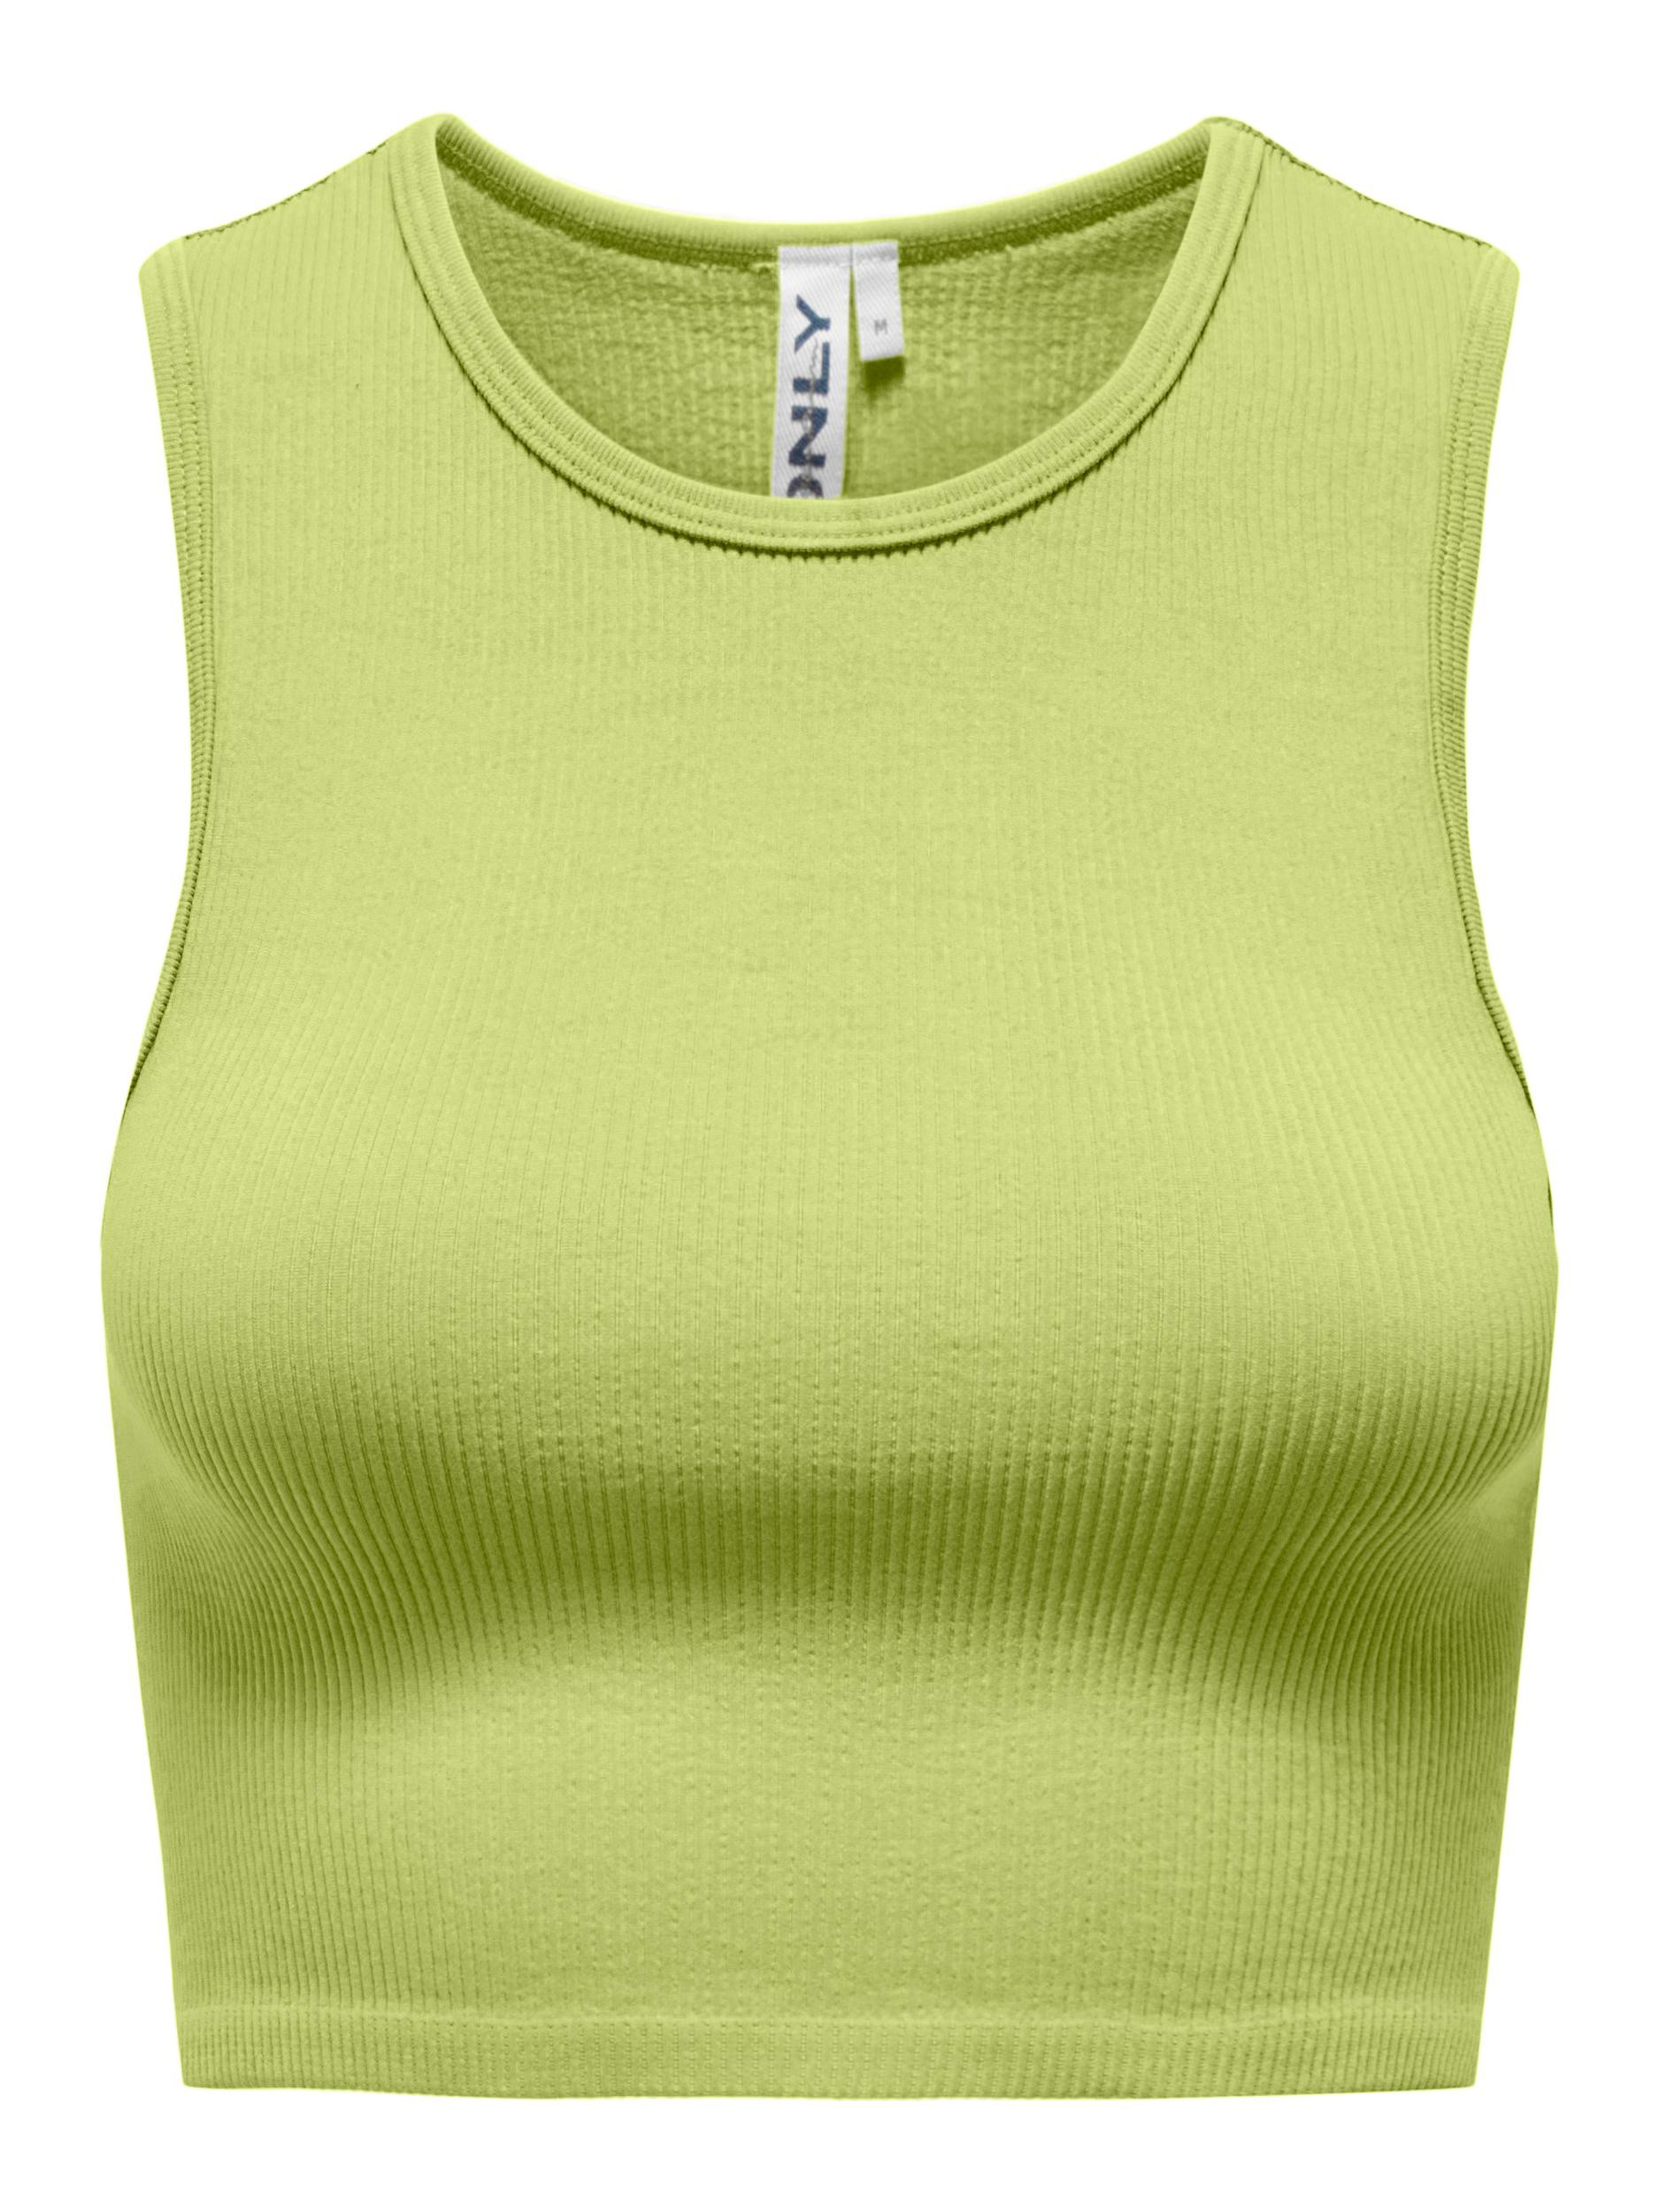 Only - Top stretch fit, Verde lime, large image number 0